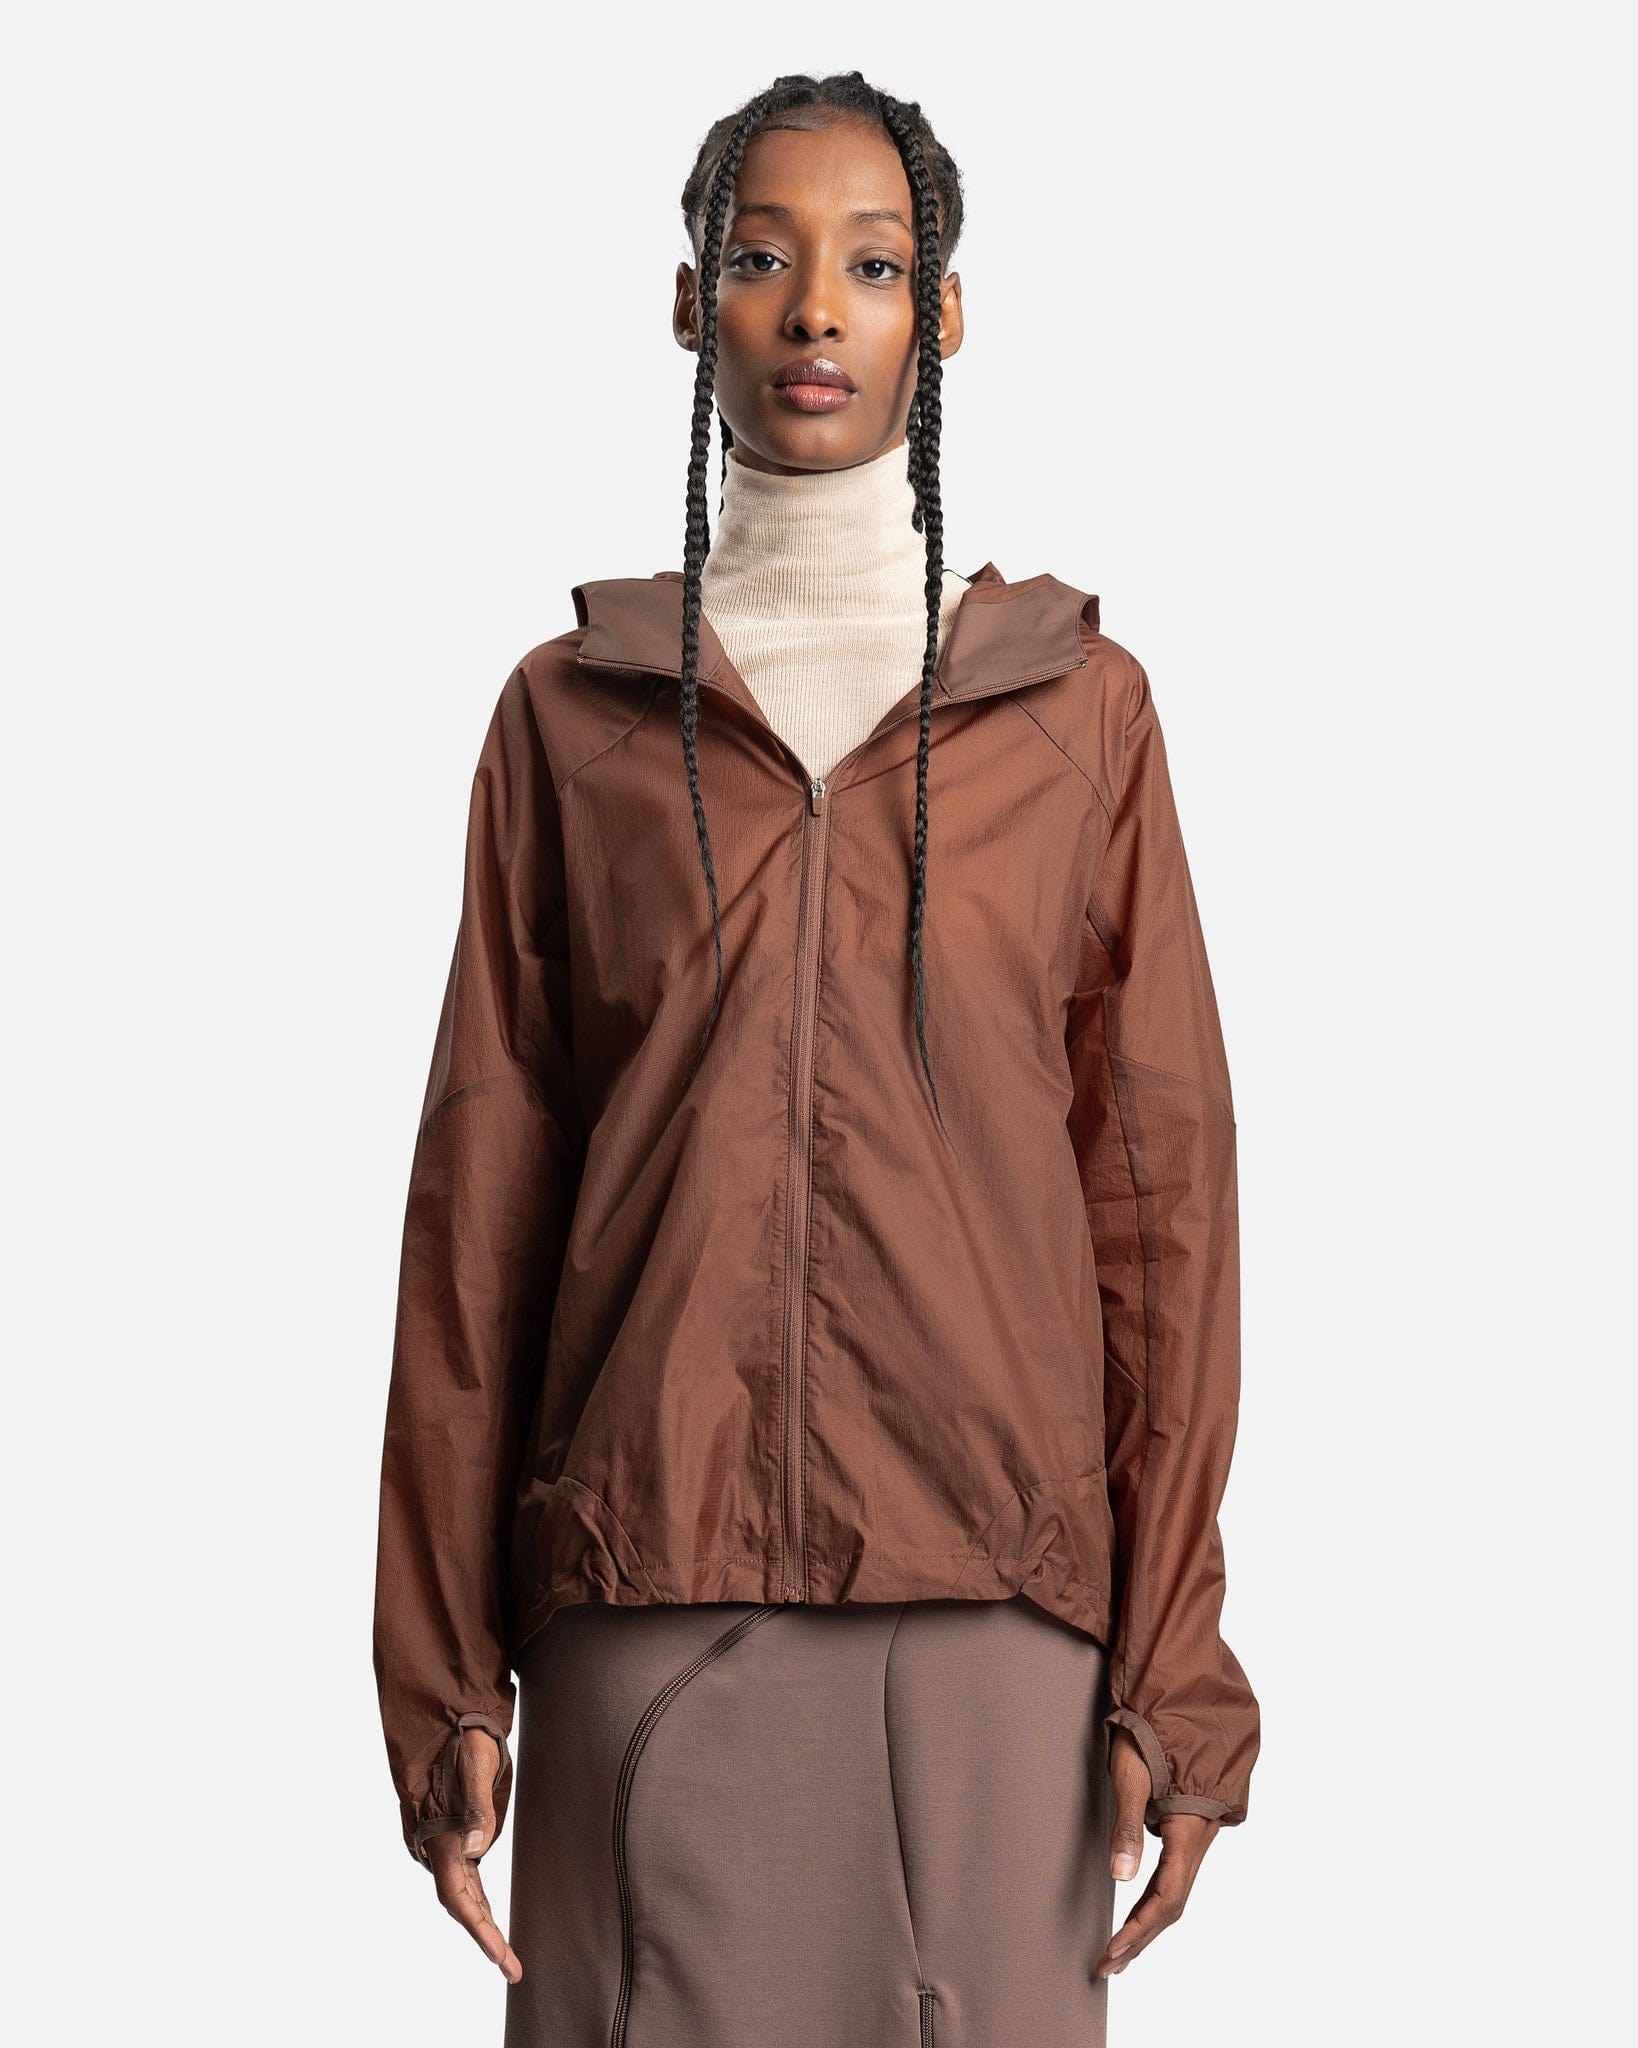 Women's 5.0 Technical Jacket Right in Brown